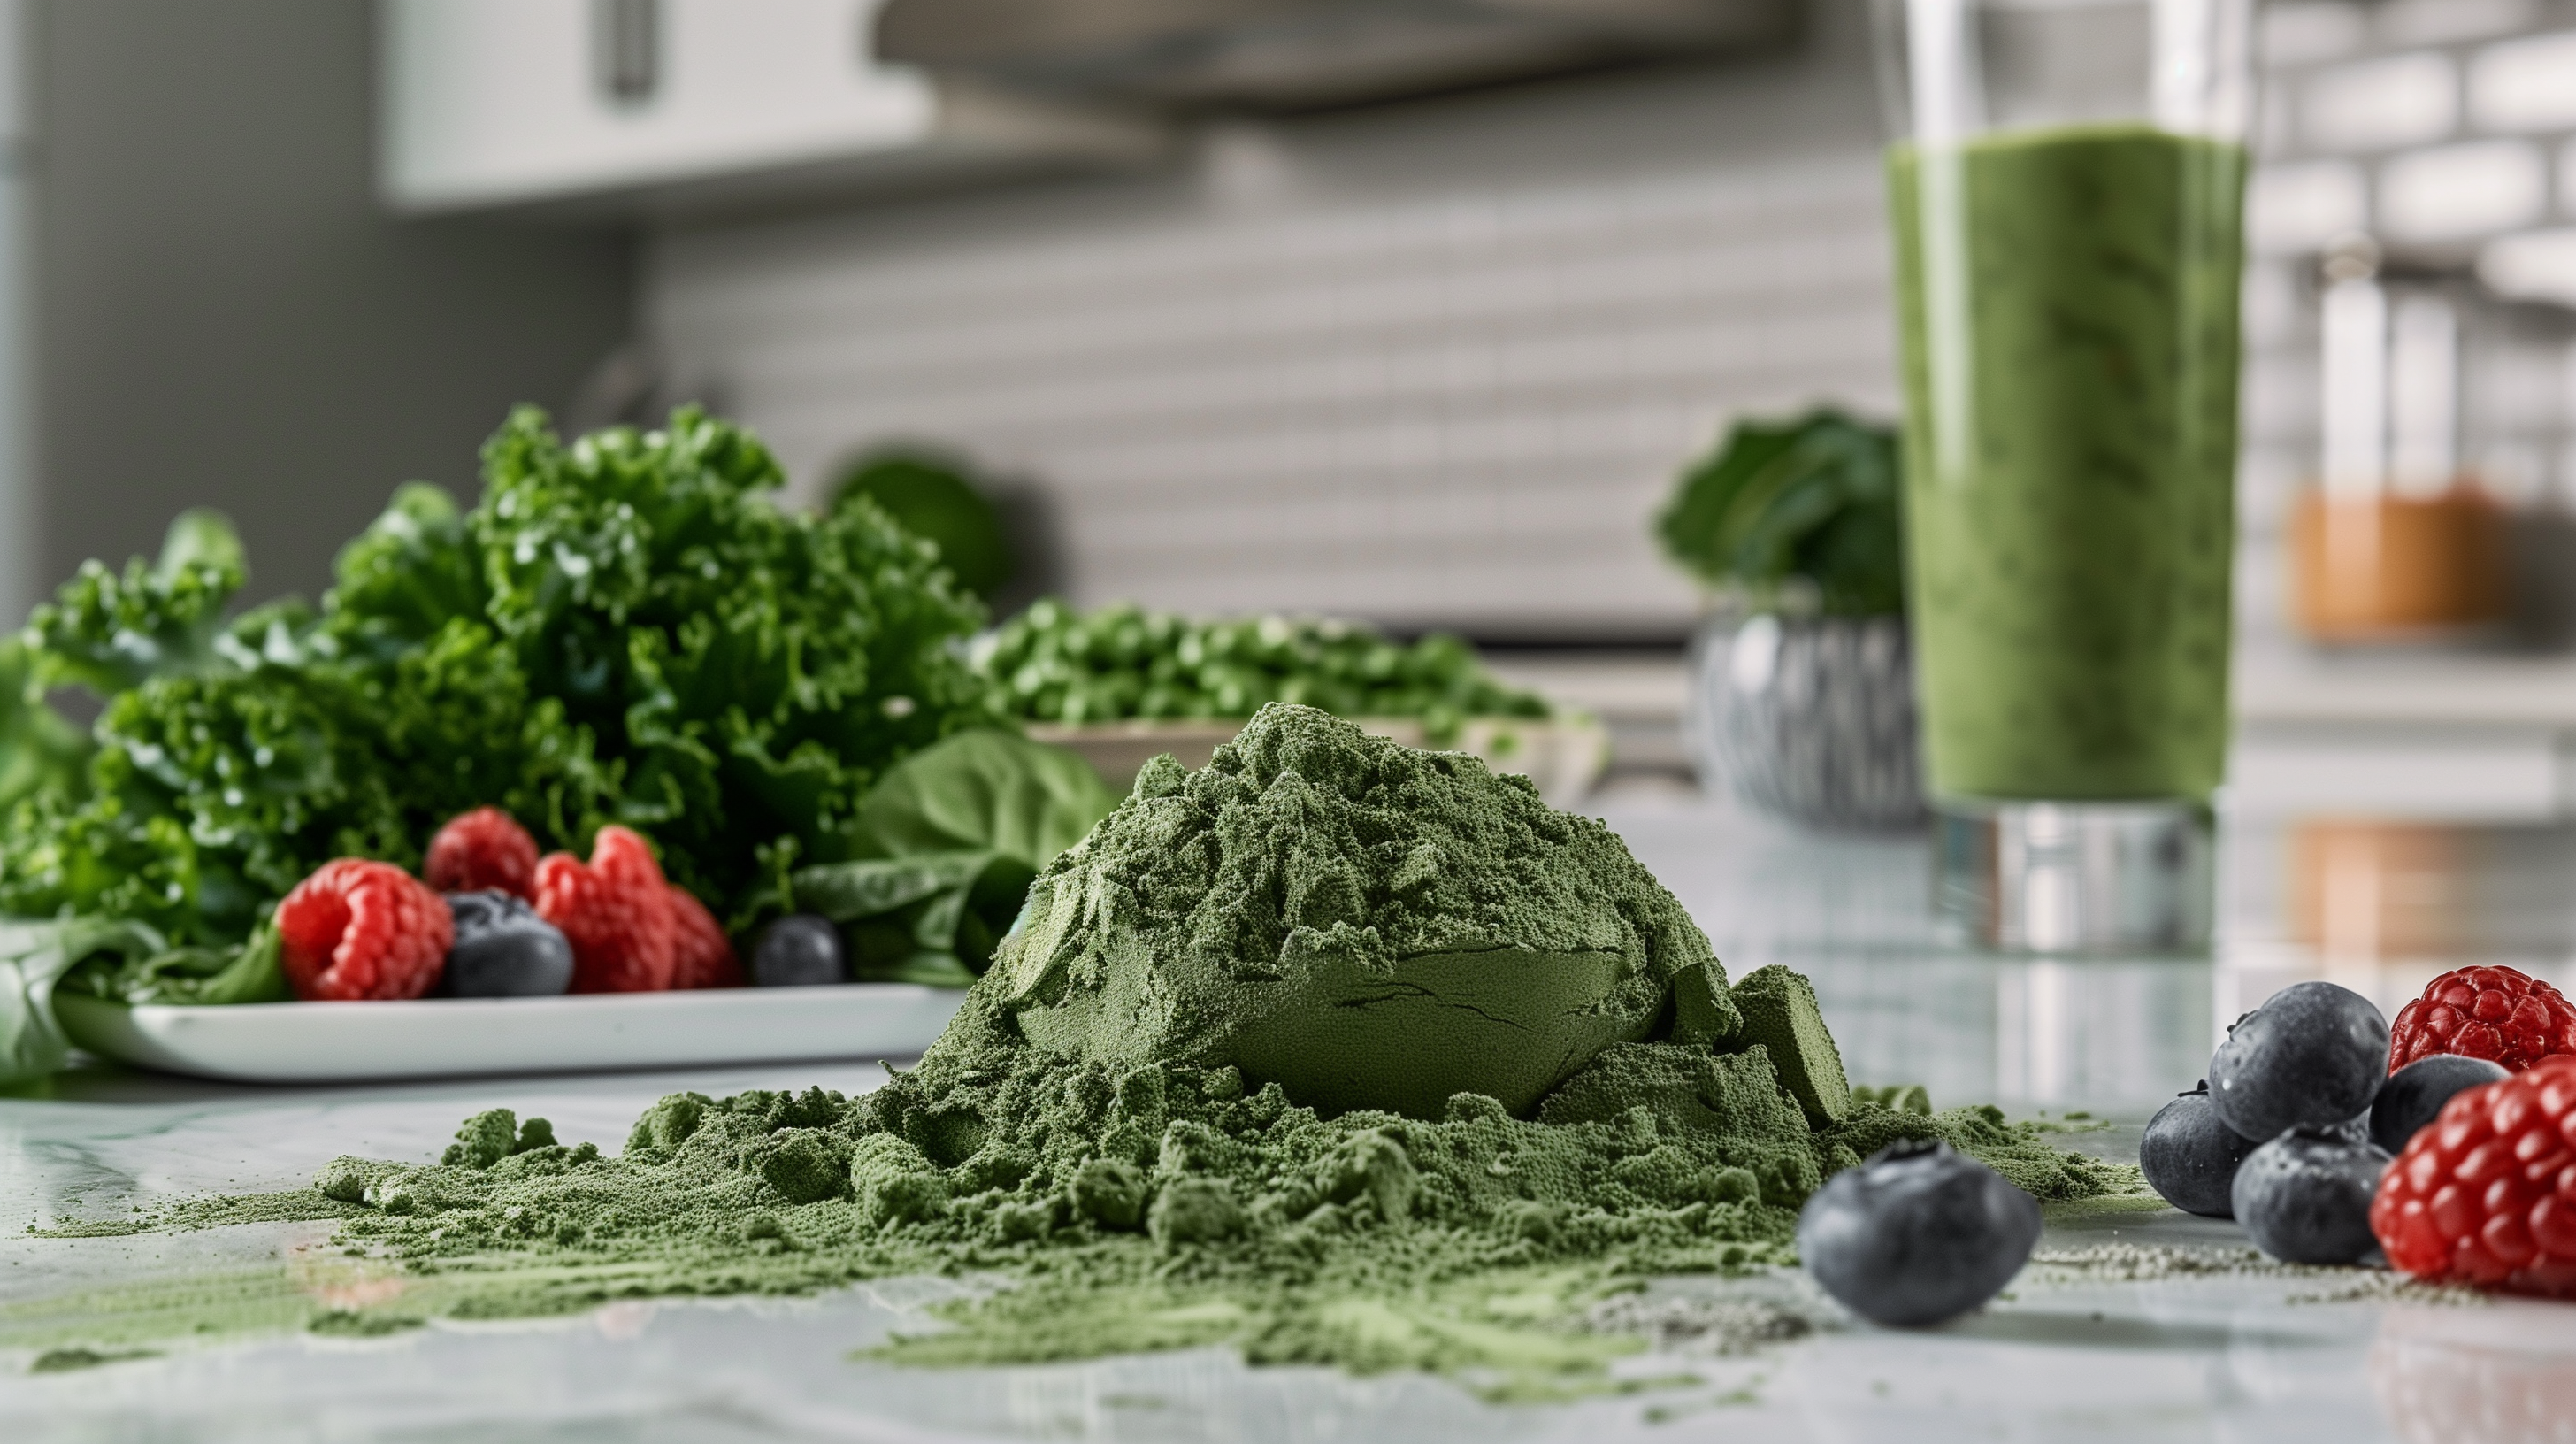 scoop of mixed greens powder with visible bits of kale, spinach, and berries, in a kitchen